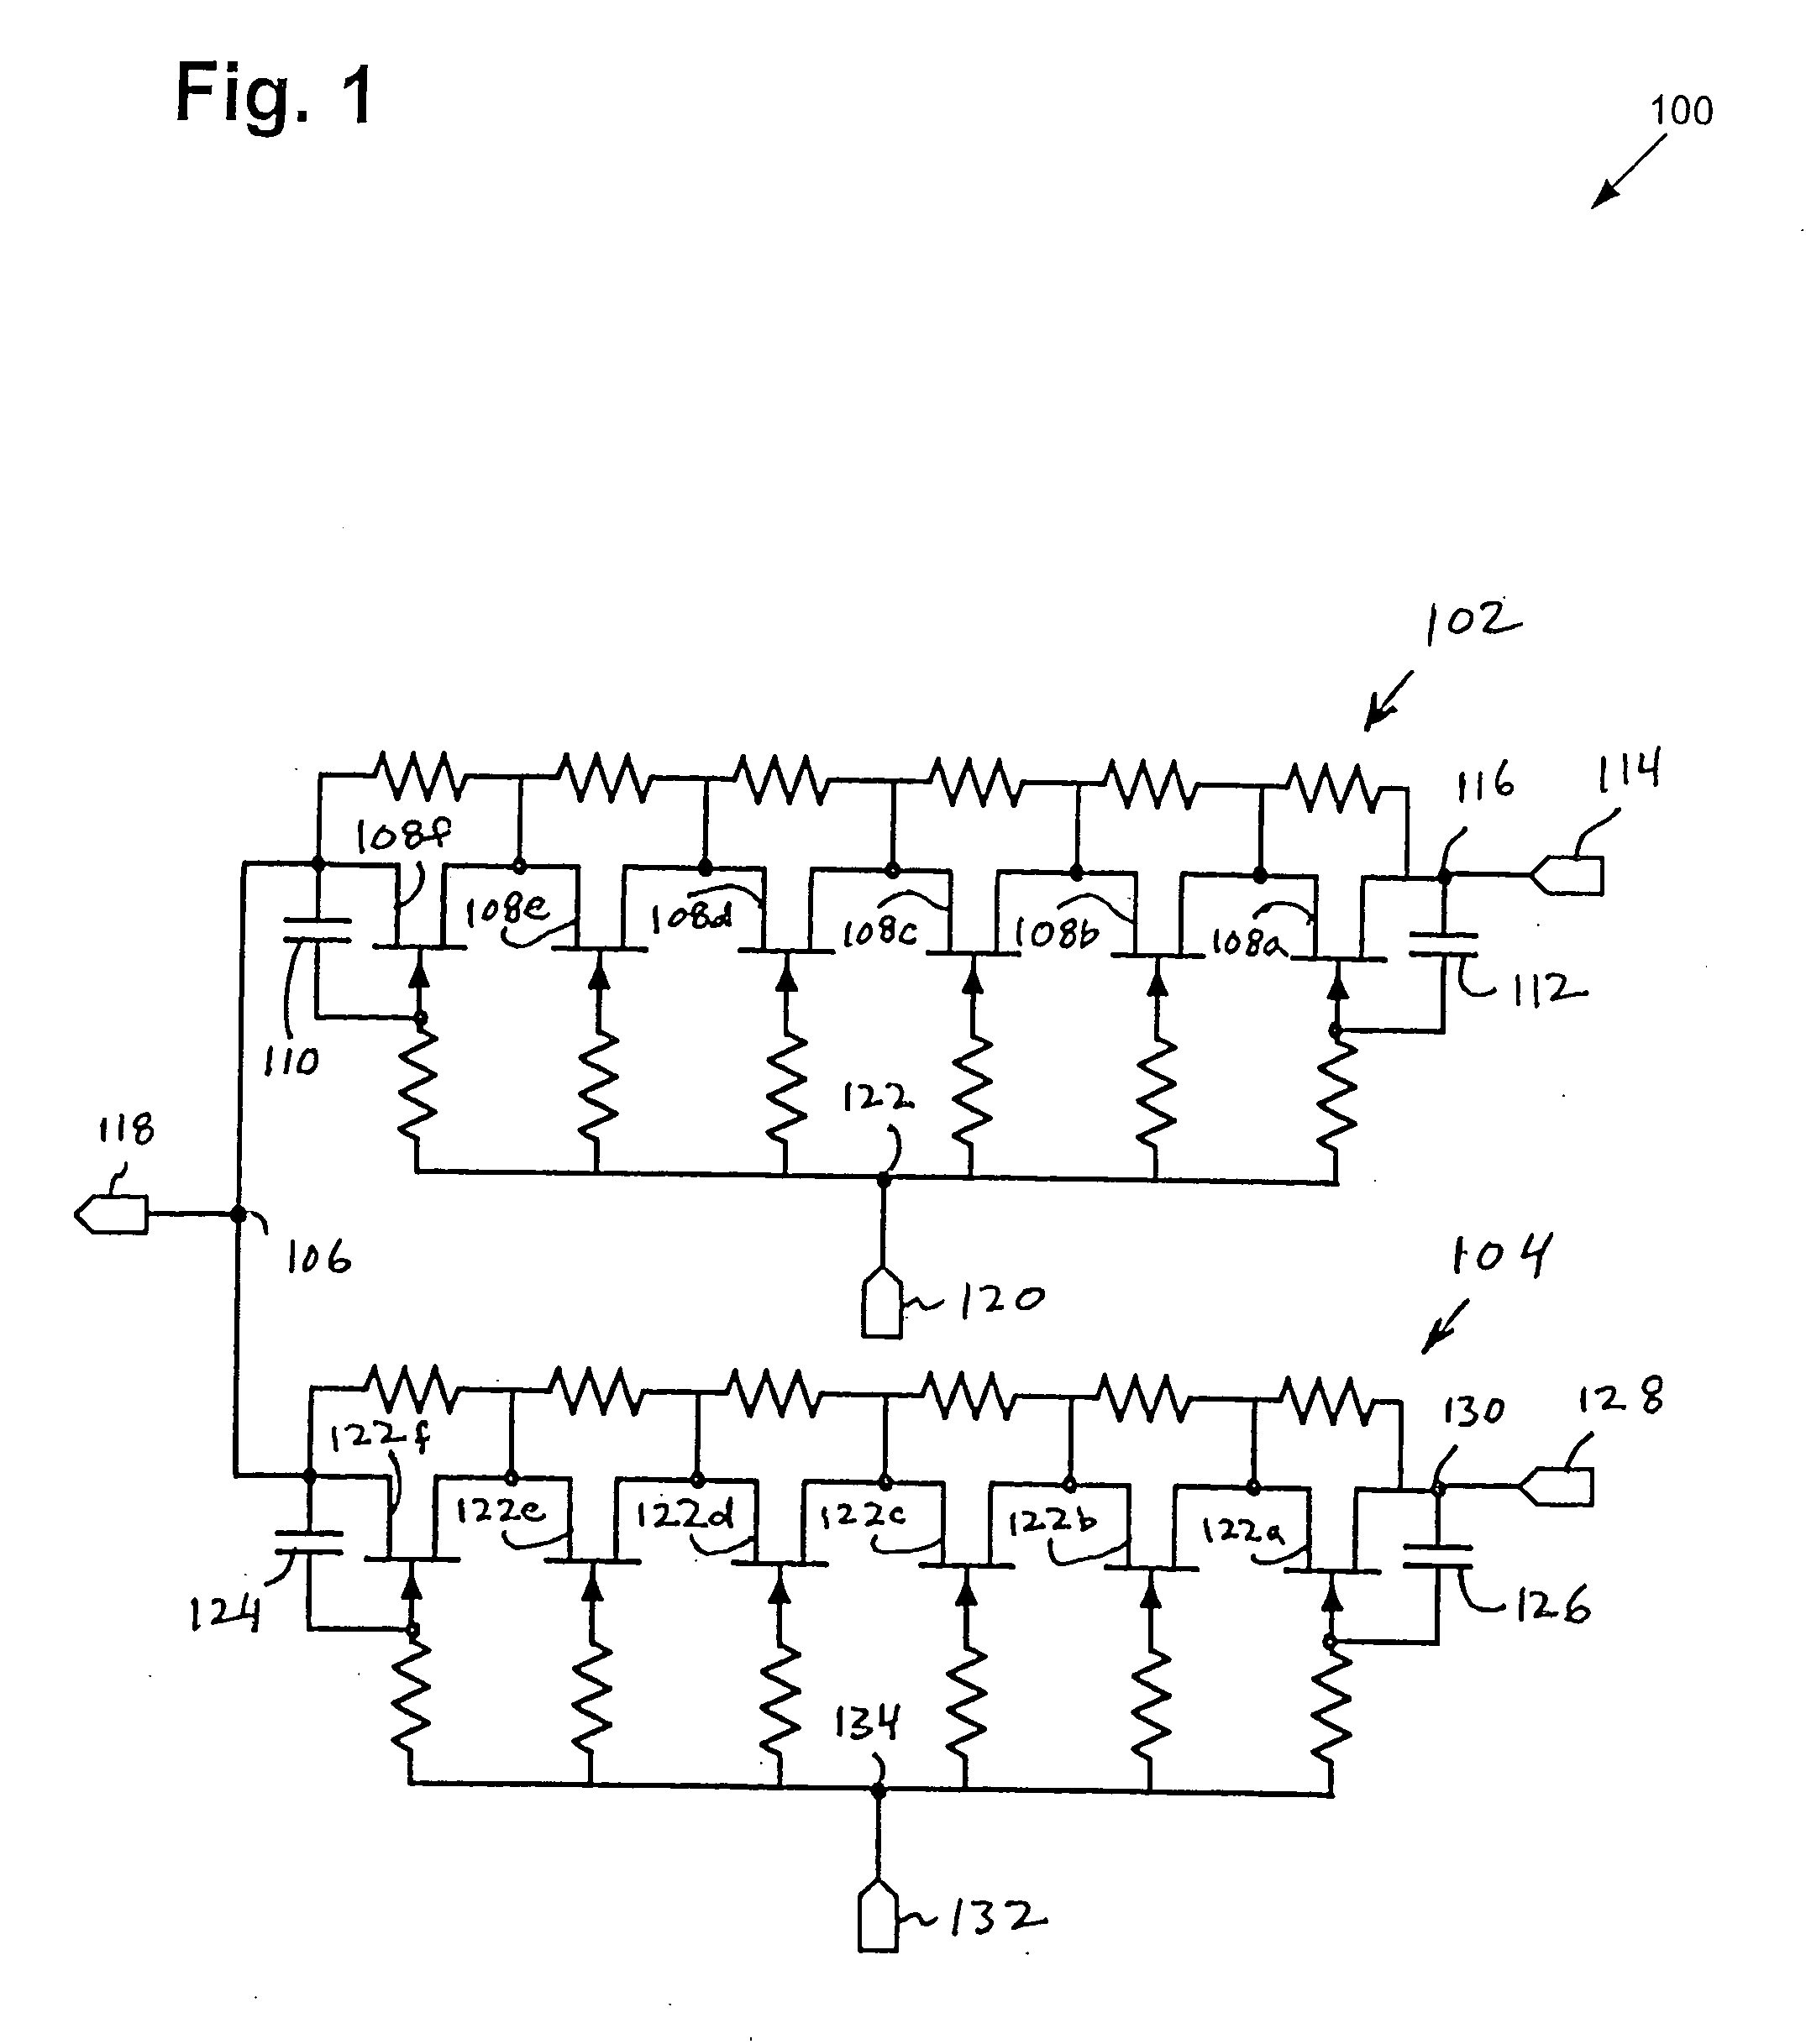 High-frequency switching device with reduced harmonics